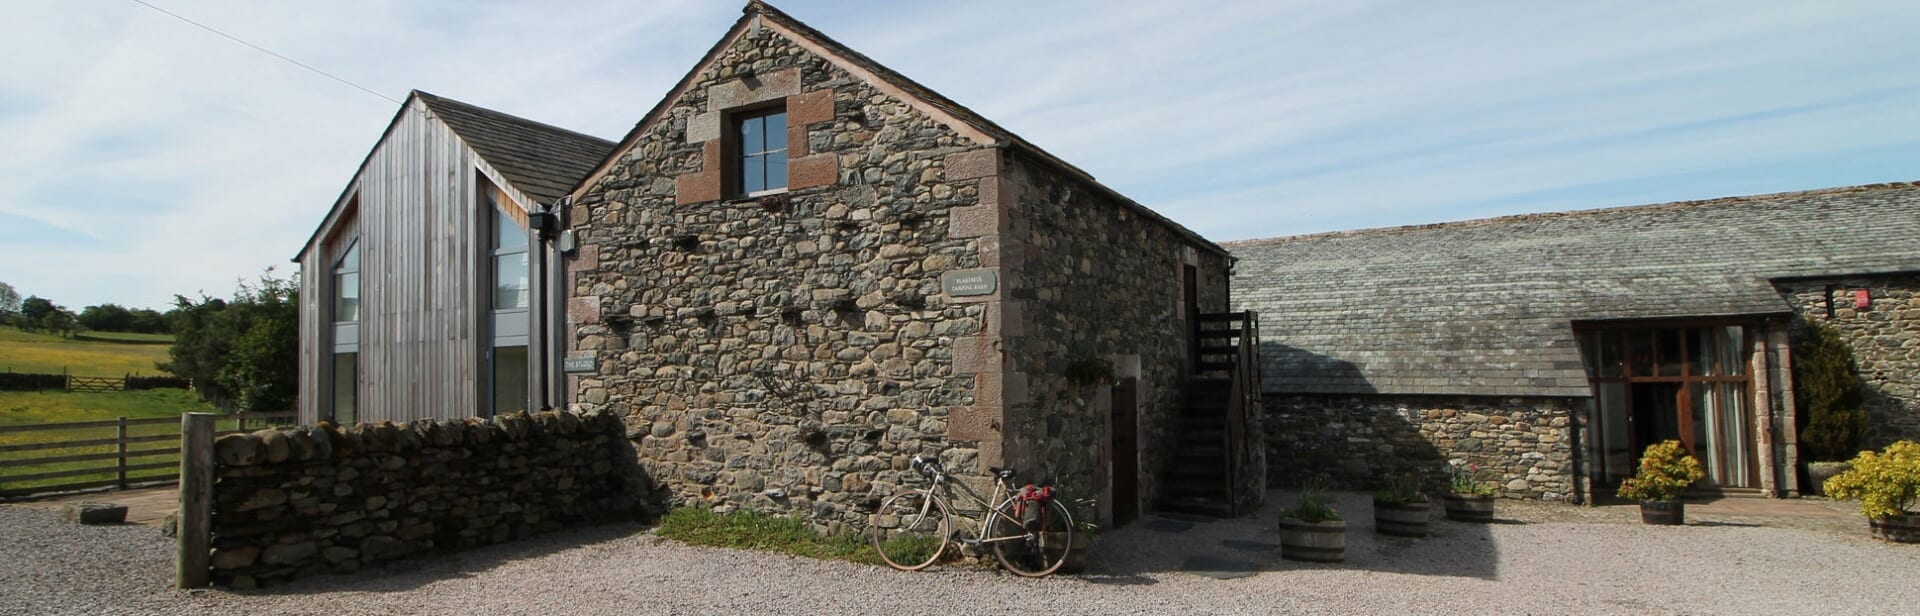 Blakebeck Farm Camping Barn on the Coast to Coast / C2C / Sea to Sea route at Mungrisedale